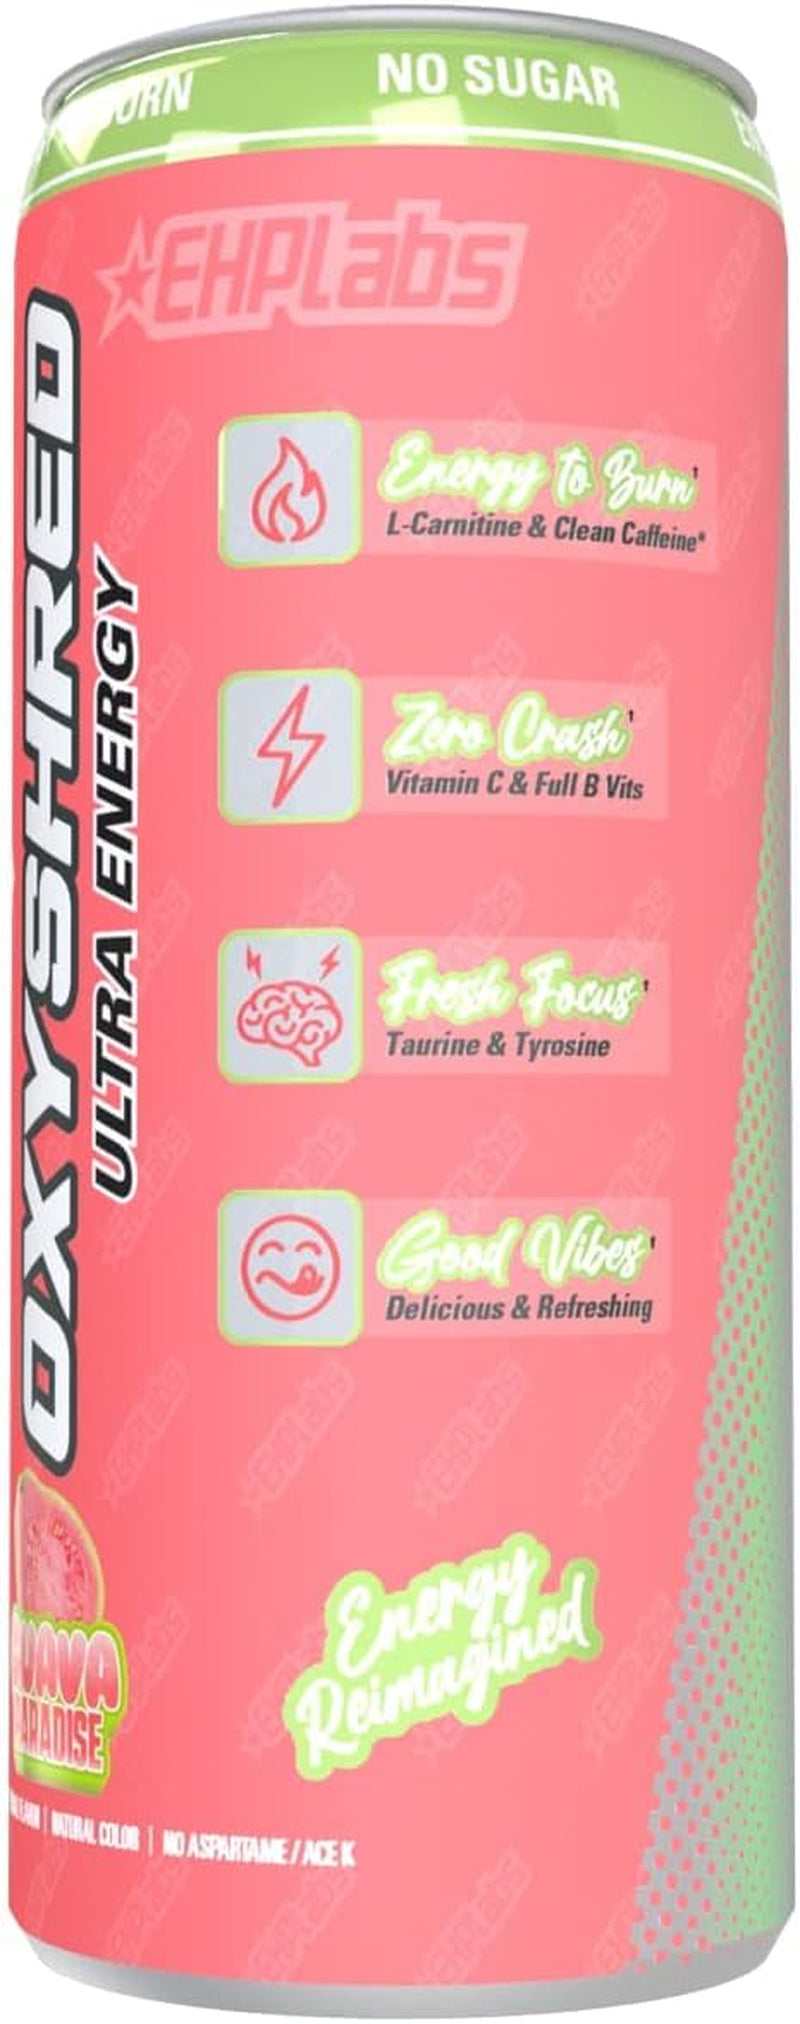 Ehplabs Oxyshred Ultra Energy Drink - Performance Carbonated Healthy Energy Drink with B Vitamins & Amino Acids, Zero Sugar, Zero Carbs & Zero Calories, Natural Clean Caffeine, Guava Paradise (12-Pack)